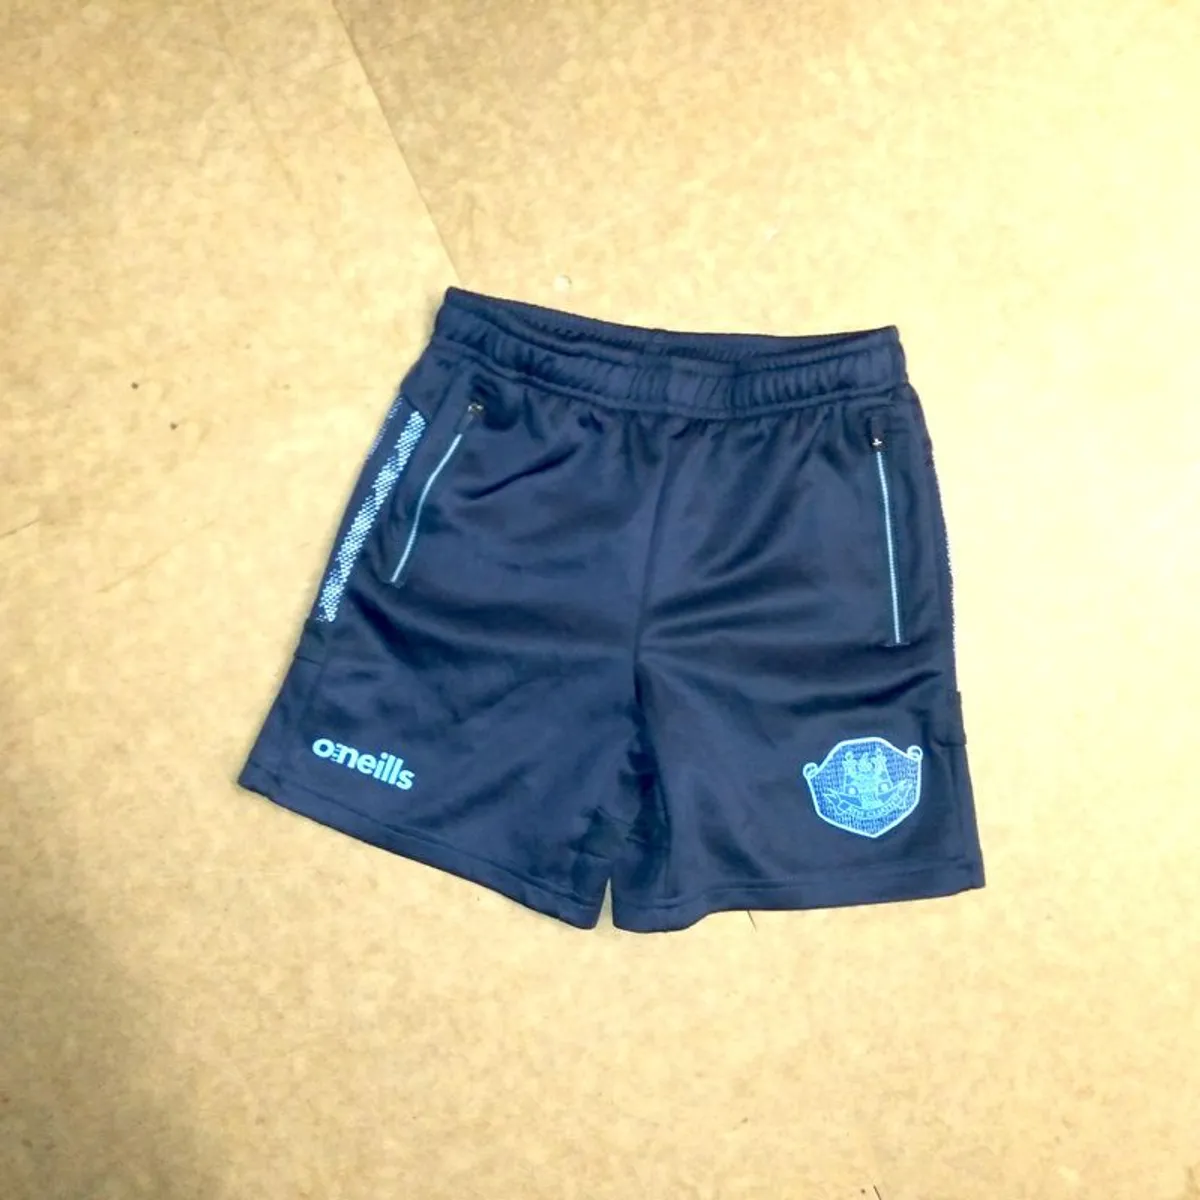 FREE POST Kids (9-10 Years) Dublin GAA  Shorts Gaelic Football Hurling Baile Atha Cliath Dubs Blue Bottoms Togs Pants Youths Childs Childrens Kids Boys Girls